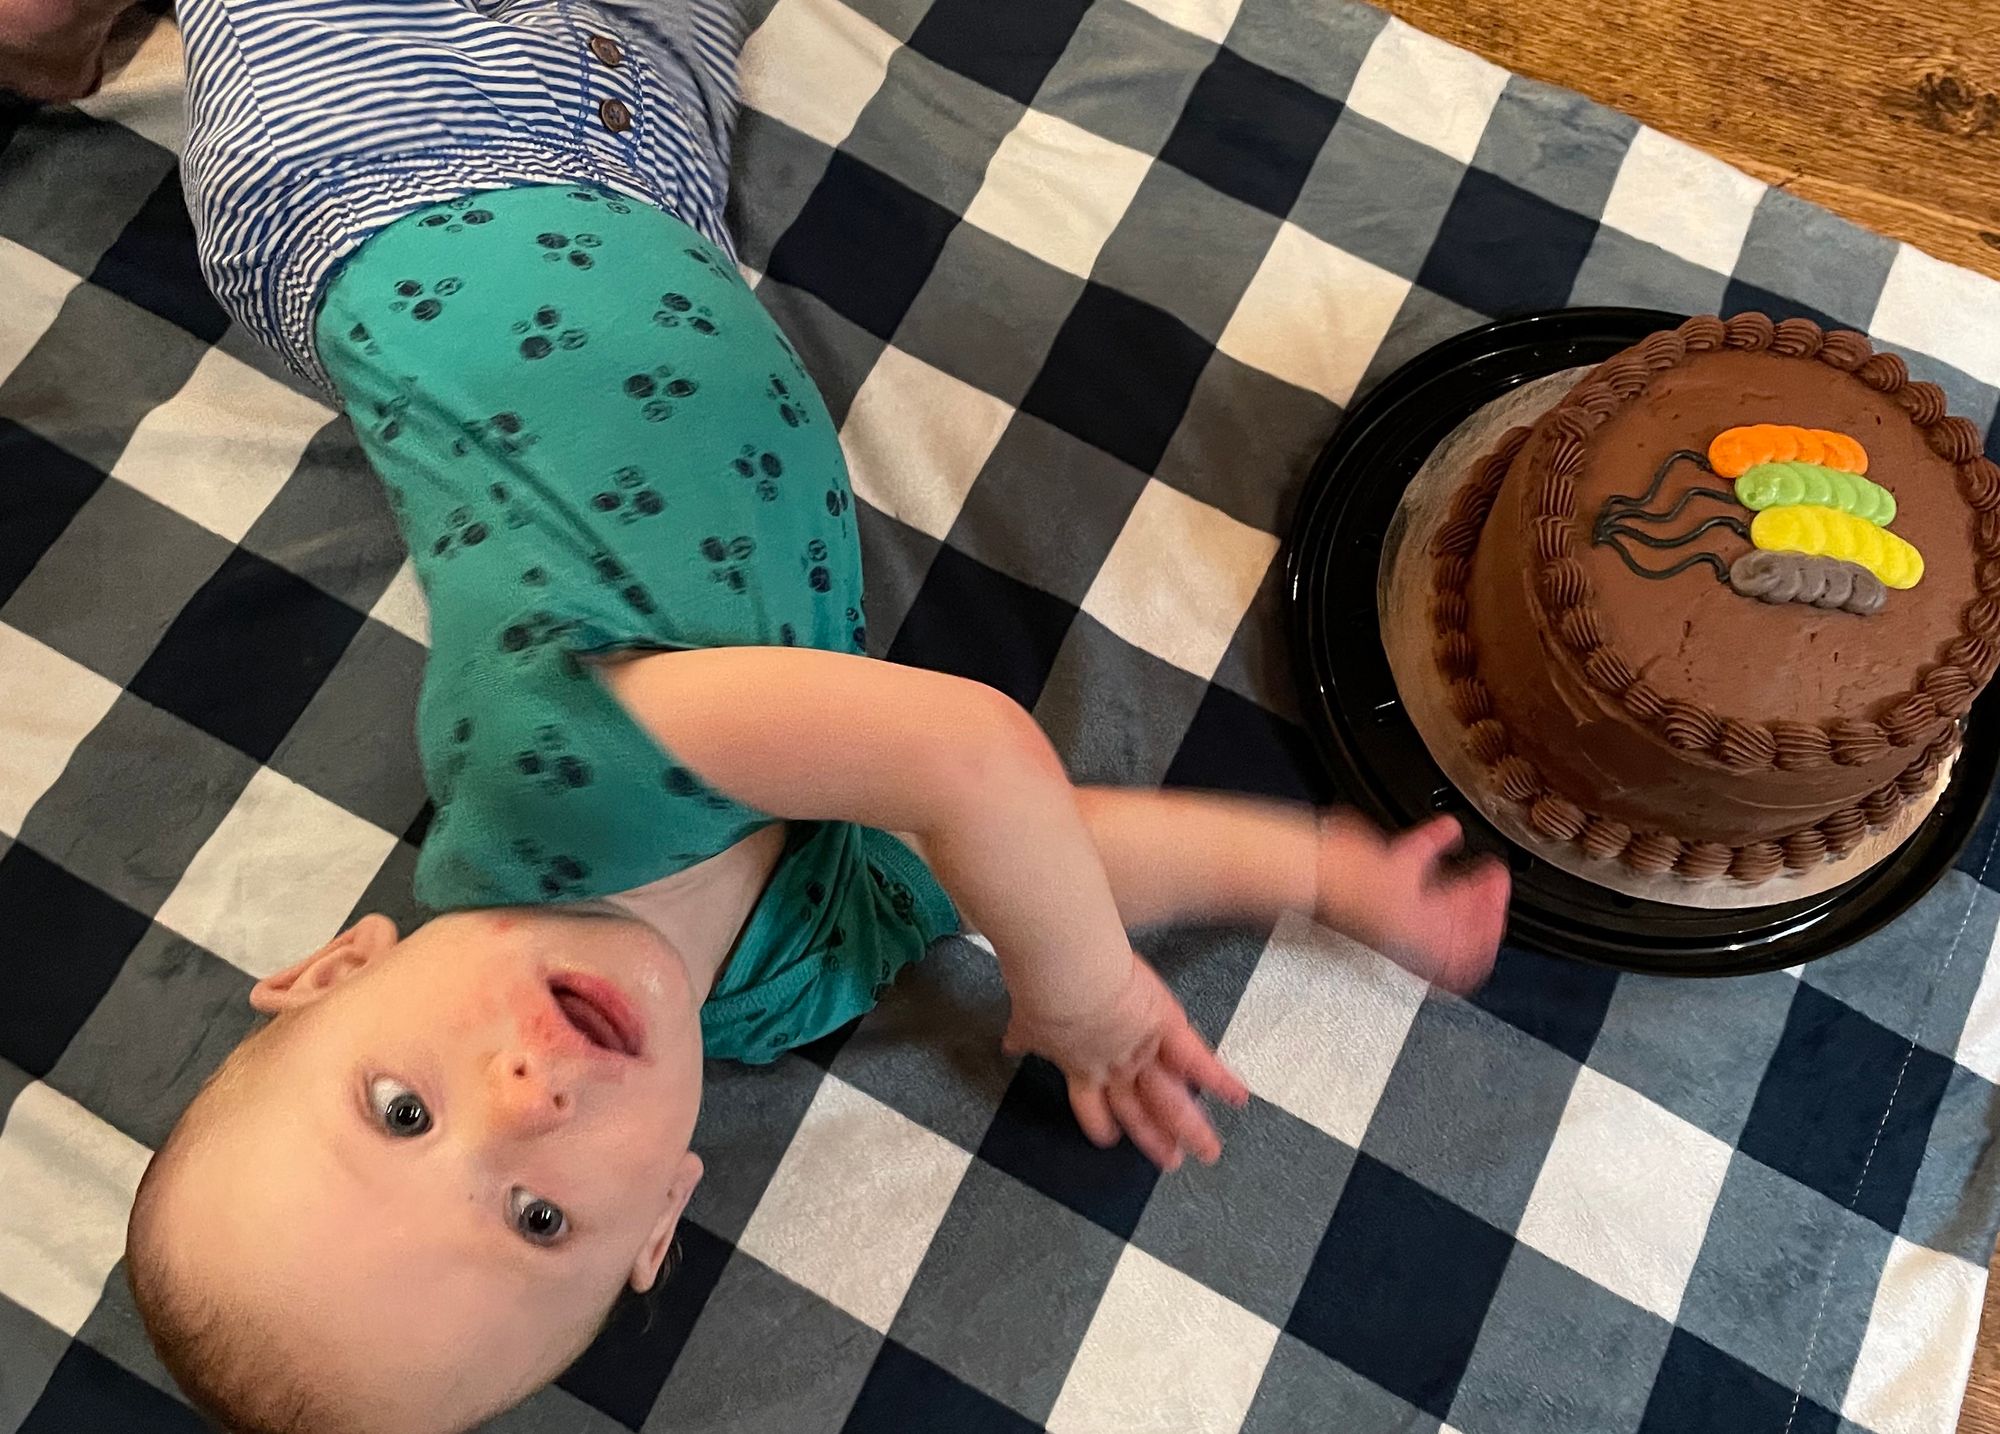 Freddie is mid-rollover, next to a chocolate cake.